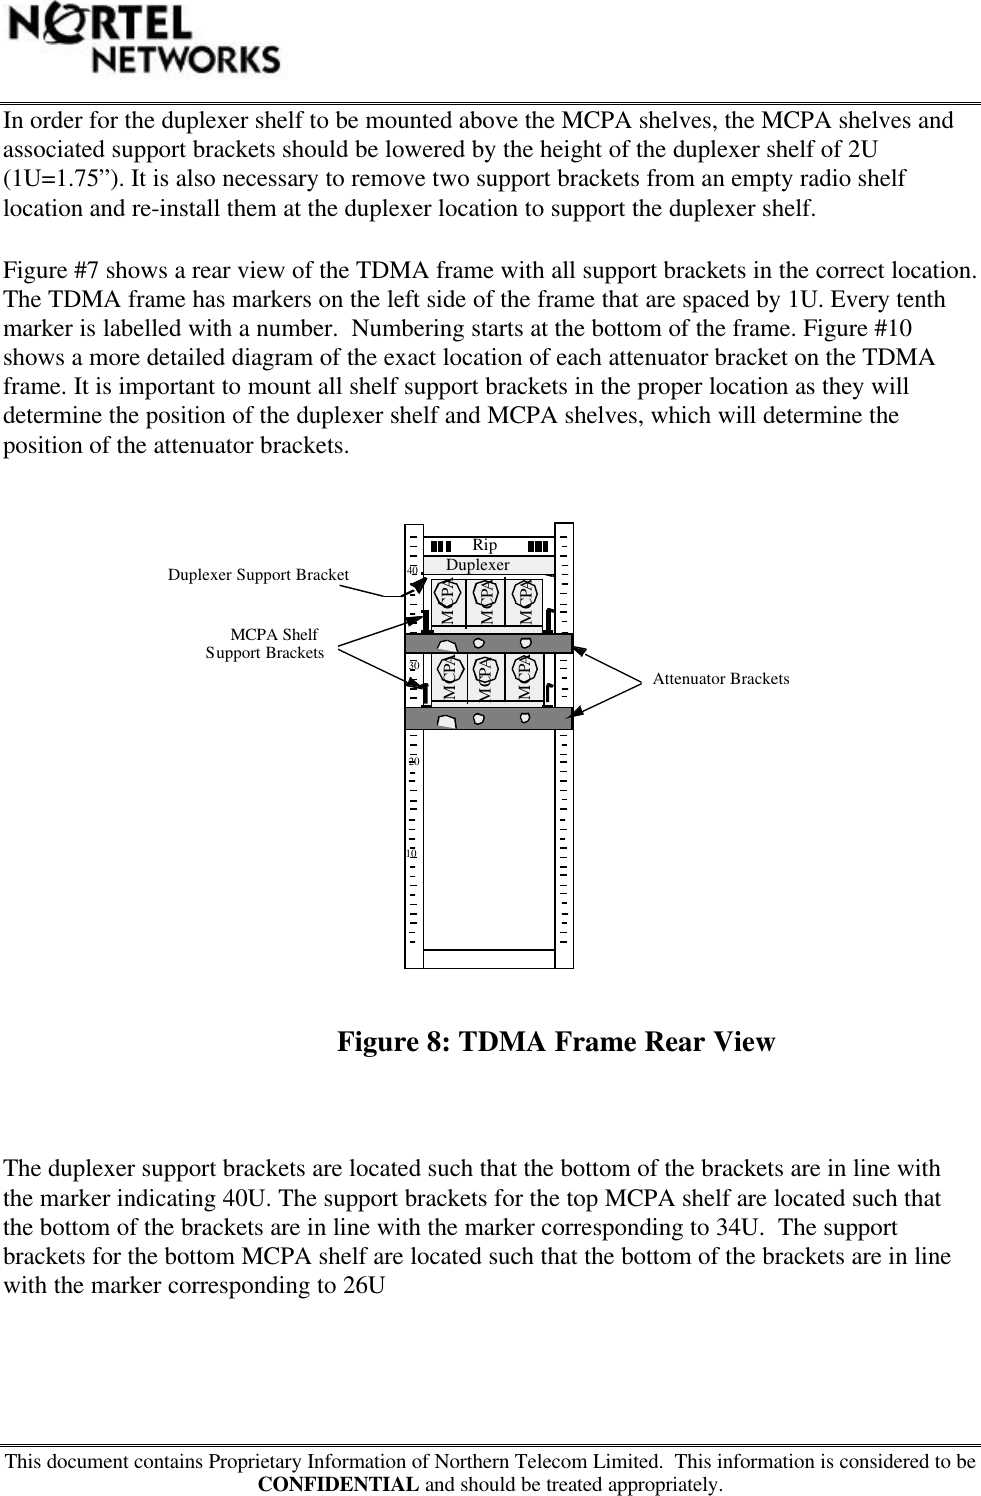 This document contains Proprietary Information of Northern Telecom Limited.  This information is considered to beCONFIDENTIAL and should be treated appropriately.In order for the duplexer shelf to be mounted above the MCPA shelves, the MCPA shelves andassociated support brackets should be lowered by the height of the duplexer shelf of 2U(1U=1.75”). It is also necessary to remove two support brackets from an empty radio shelflocation and re-install them at the duplexer location to support the duplexer shelf.Figure #7 shows a rear view of the TDMA frame with all support brackets in the correct location.The TDMA frame has markers on the left side of the frame that are spaced by 1U. Every tenthmarker is labelled with a number.  Numbering starts at the bottom of the frame. Figure #10shows a more detailed diagram of the exact location of each attenuator bracket on the TDMAframe. It is important to mount all shelf support brackets in the proper location as they willdetermine the position of the duplexer shelf and MCPA shelves, which will determine theposition of the attenuator brackets.                                                              Figure 8: TDMA Frame Rear ViewThe duplexer support brackets are located such that the bottom of the brackets are in line withthe marker indicating 40U. The support brackets for the top MCPA shelf are located such thatthe bottom of the brackets are in line with the marker corresponding to 34U.  The supportbrackets for the bottom MCPA shelf are located such that the bottom of the brackets are in linewith the marker corresponding to 26URip40302010MCPA DuplexerMCPA MCPA MCPA MCPA MCPA MCPA ShelfSupport BracketsDuplexer Support BracketAttenuator Brackets